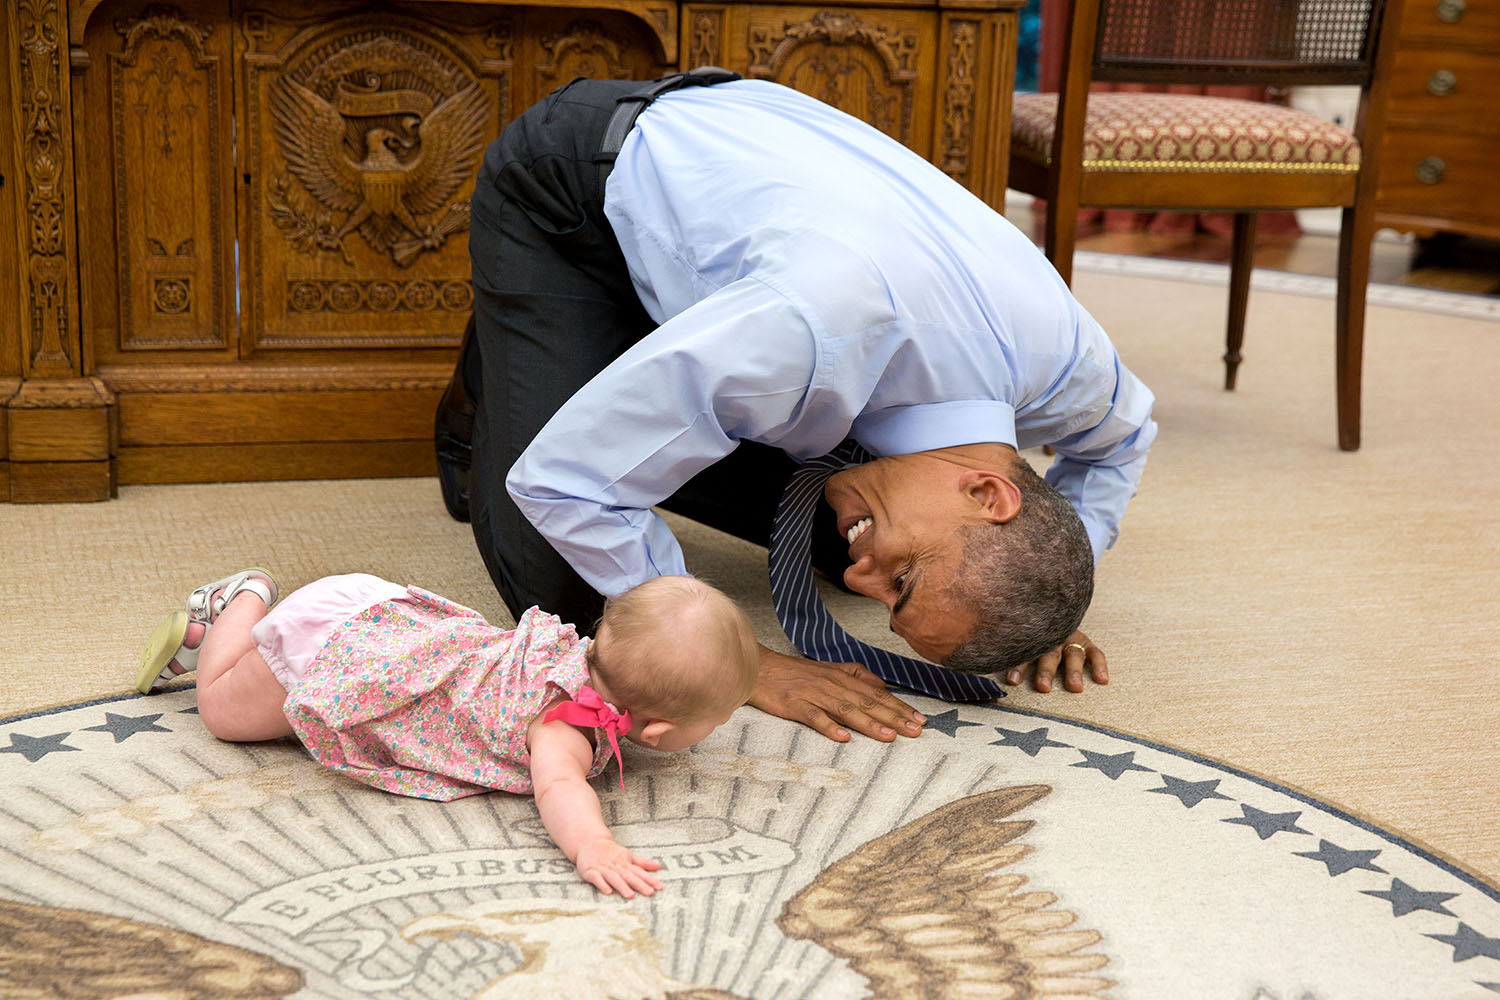 At President Obama's insistence, Deputy National Security Advisor Ben Rhodes brought his daughter Ella by for a visit on June 4, 2015. (Pete Souza—The White House)